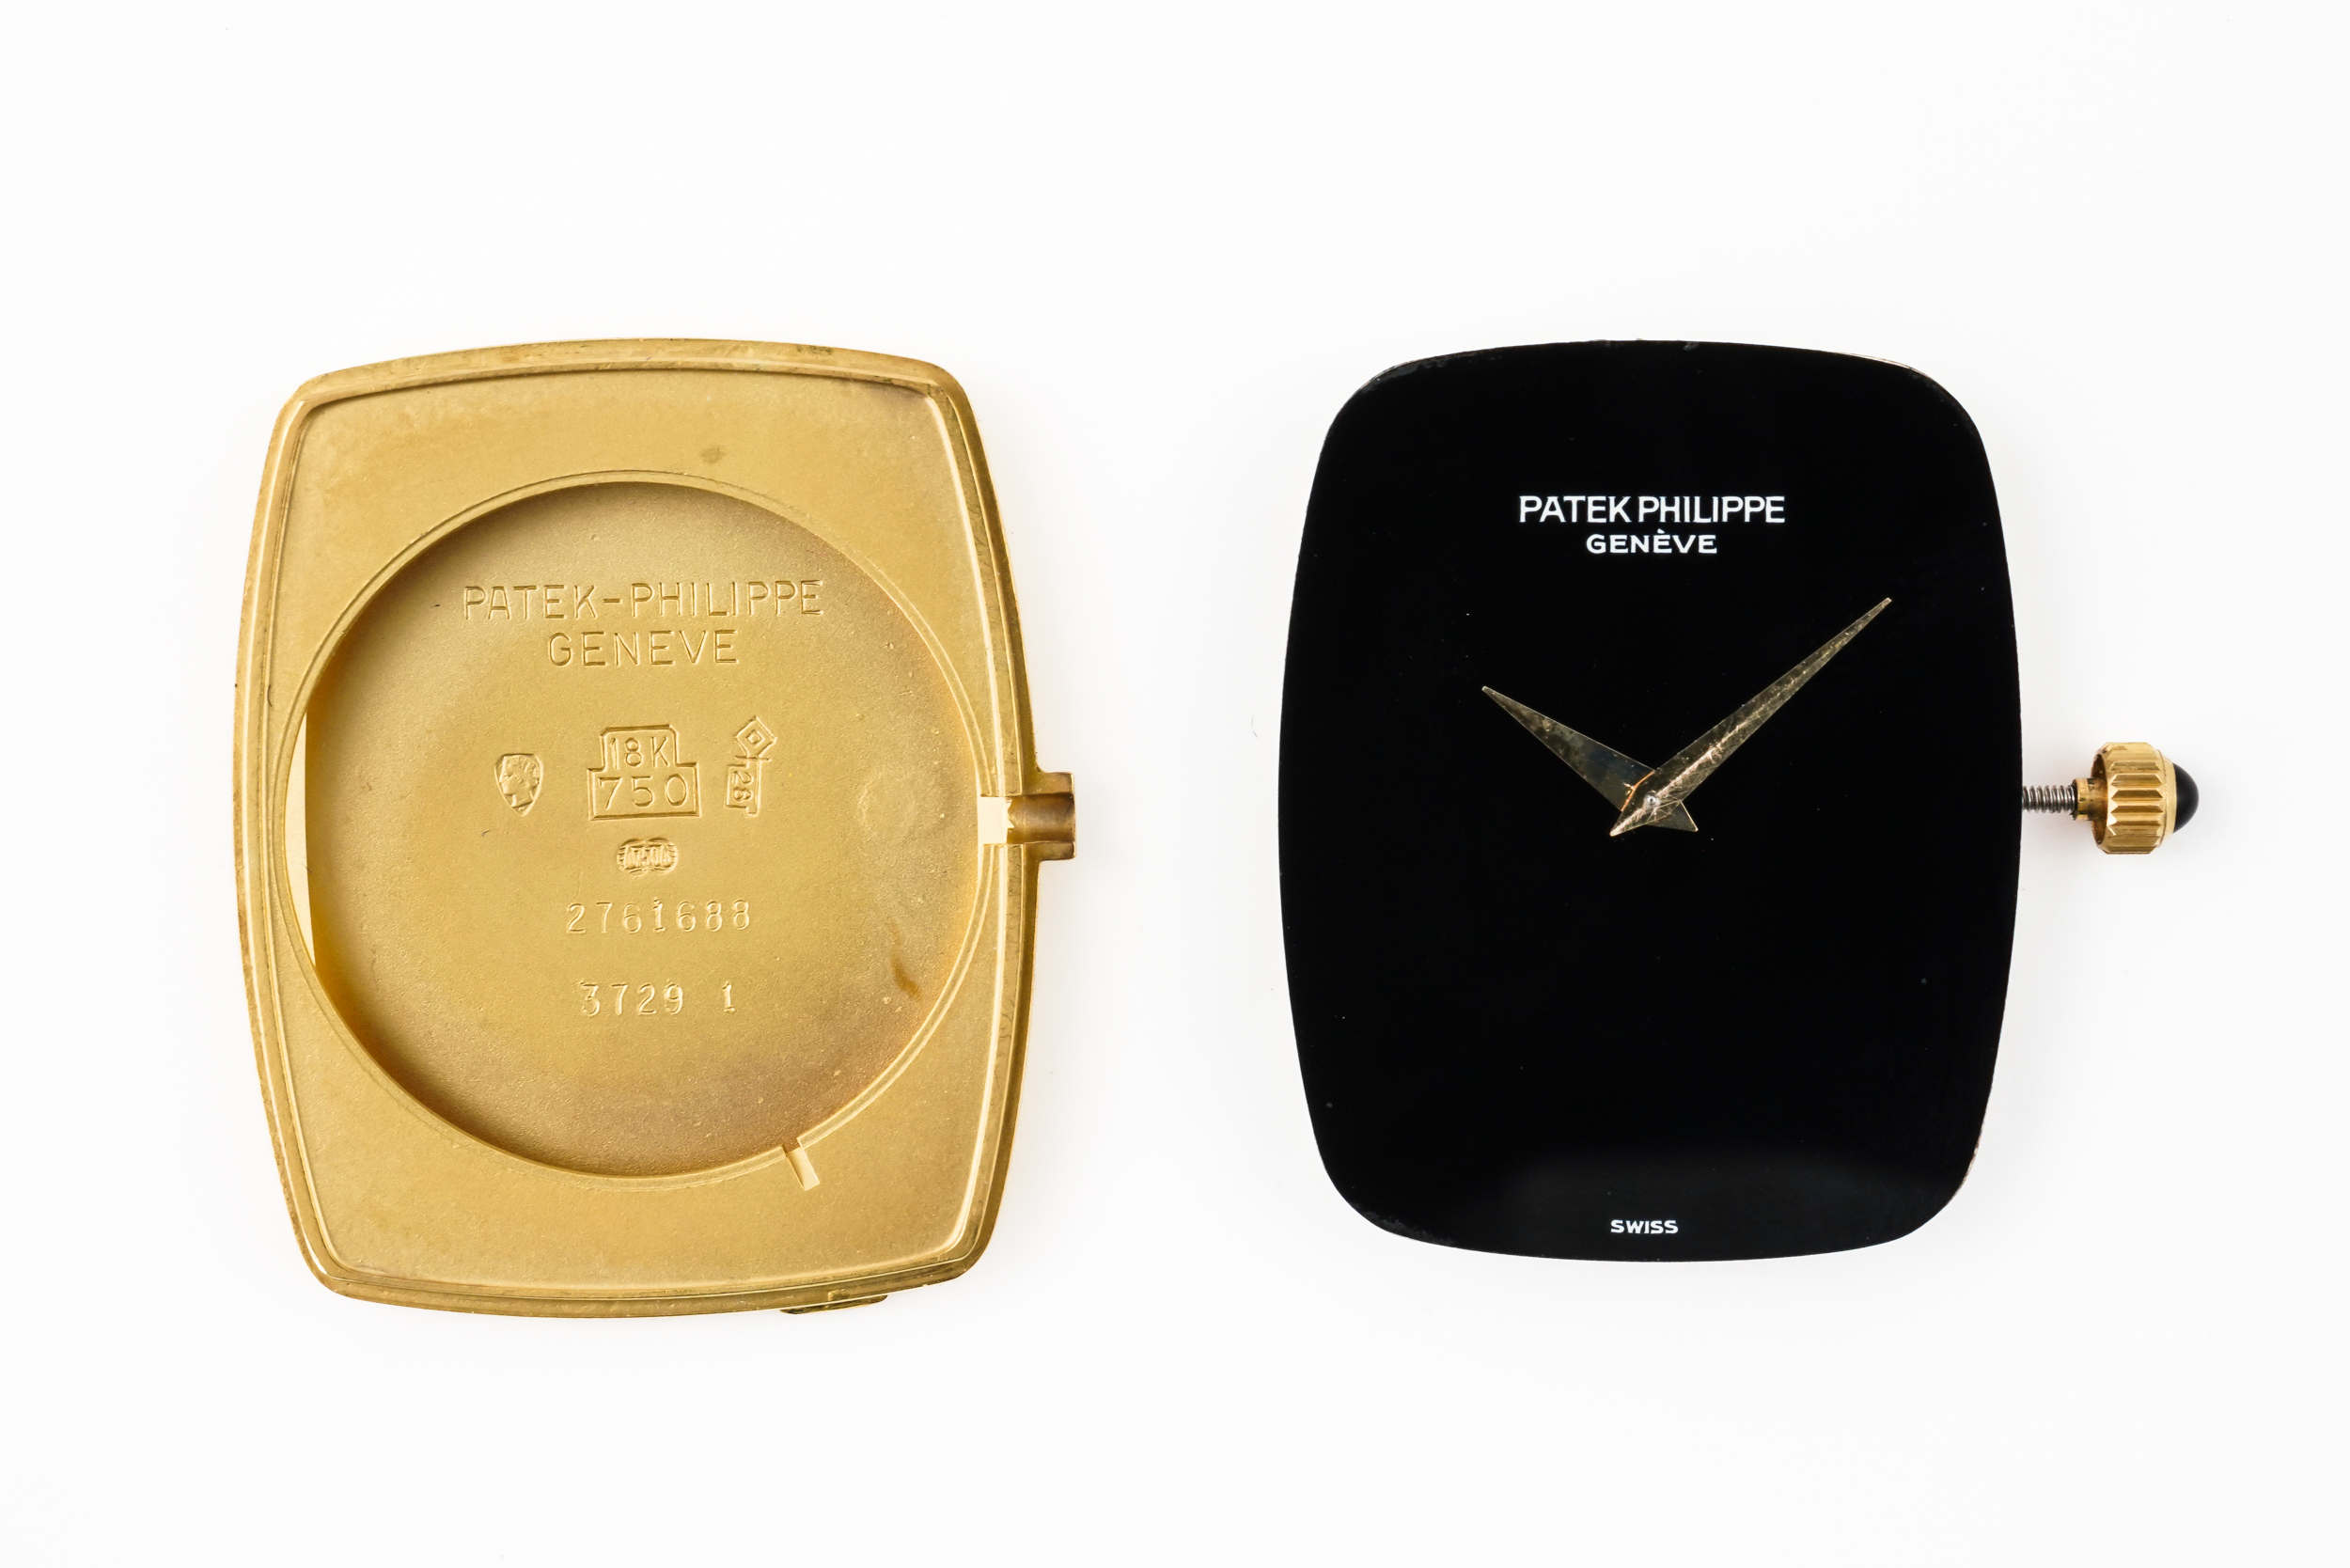 PATEK PHILIPPE 3729 GENTLEMAN'S GOLD WATCH WITH ONYX DIAL - Image 4 of 12